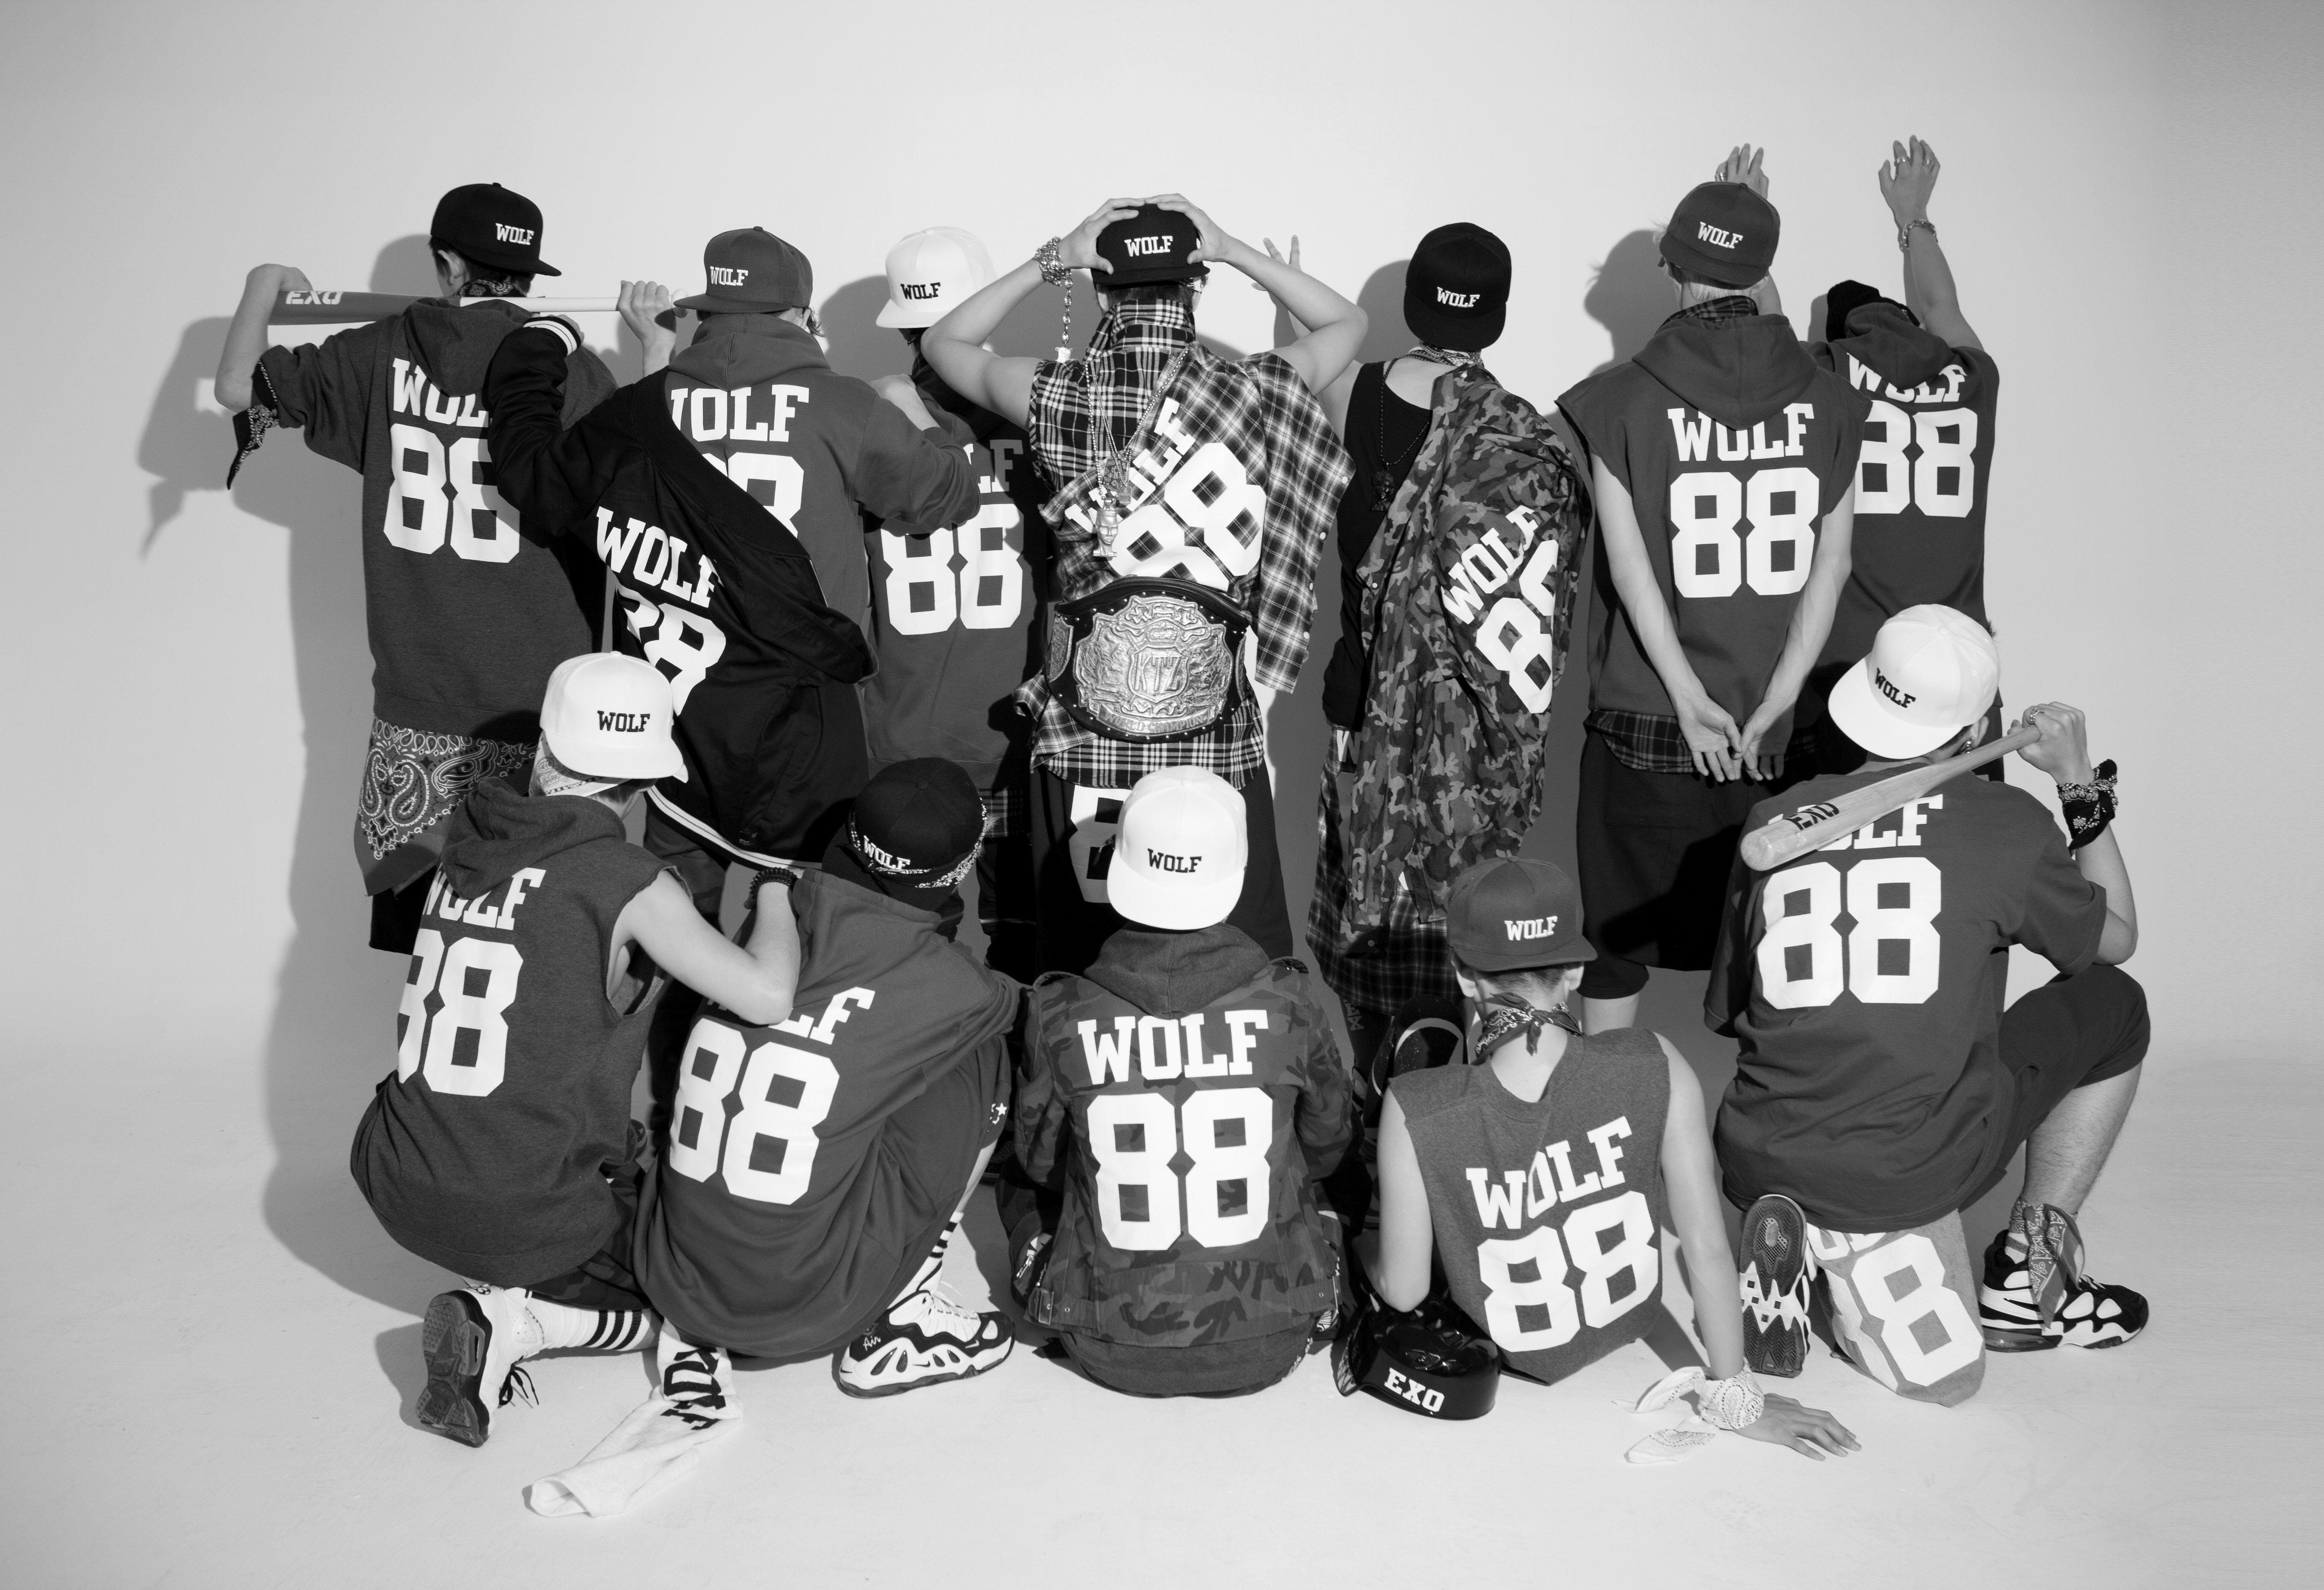 Exo Wallpapers Wallpaper Cave